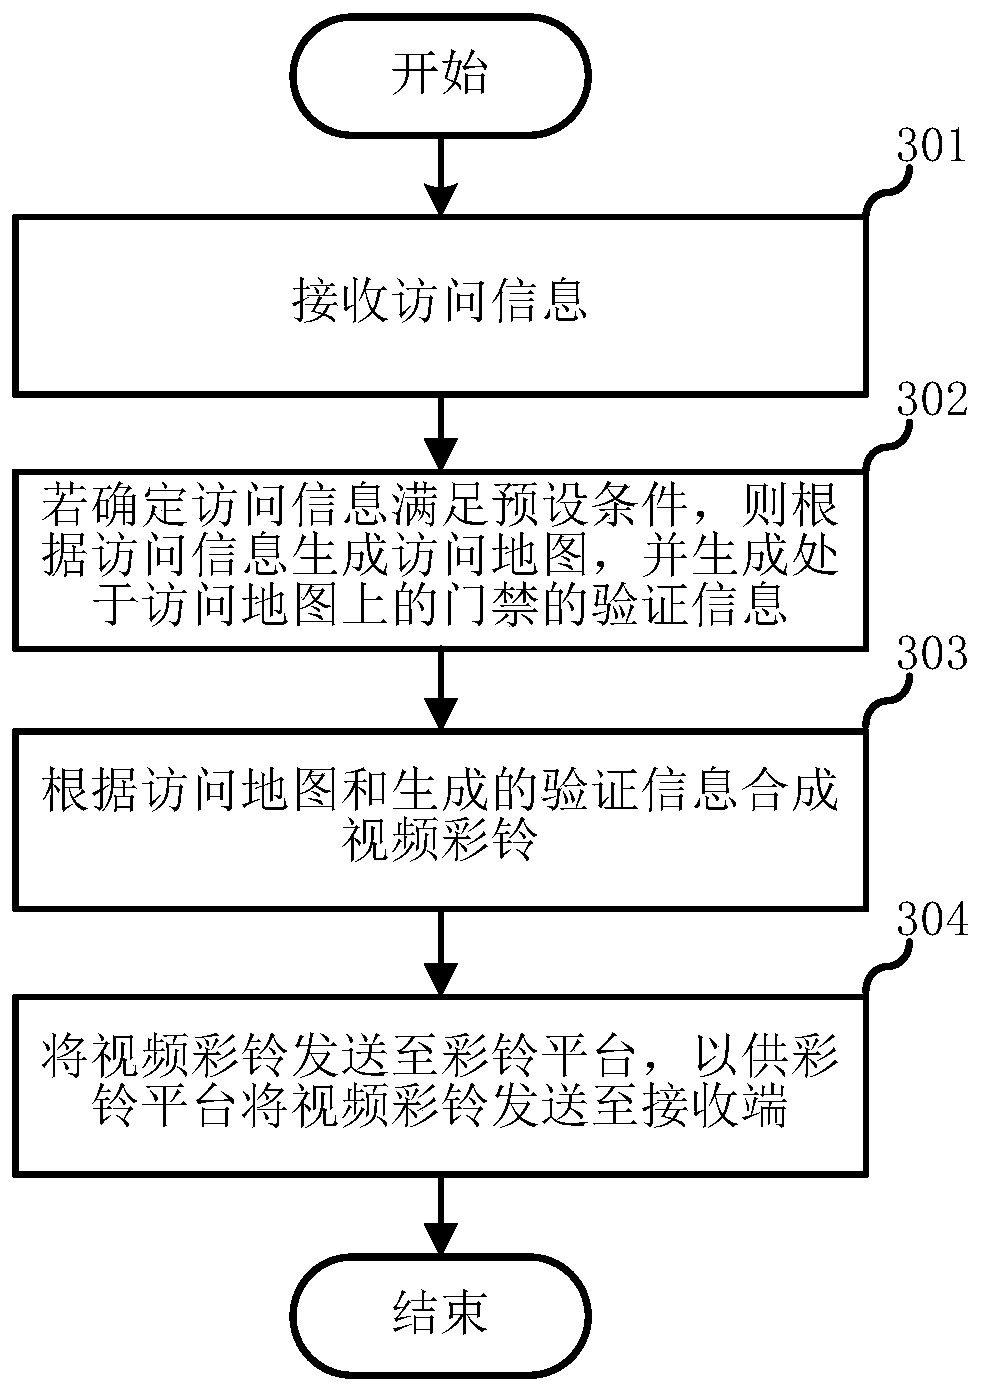 Access control opening method and system, control center, visited end and readable storage medium